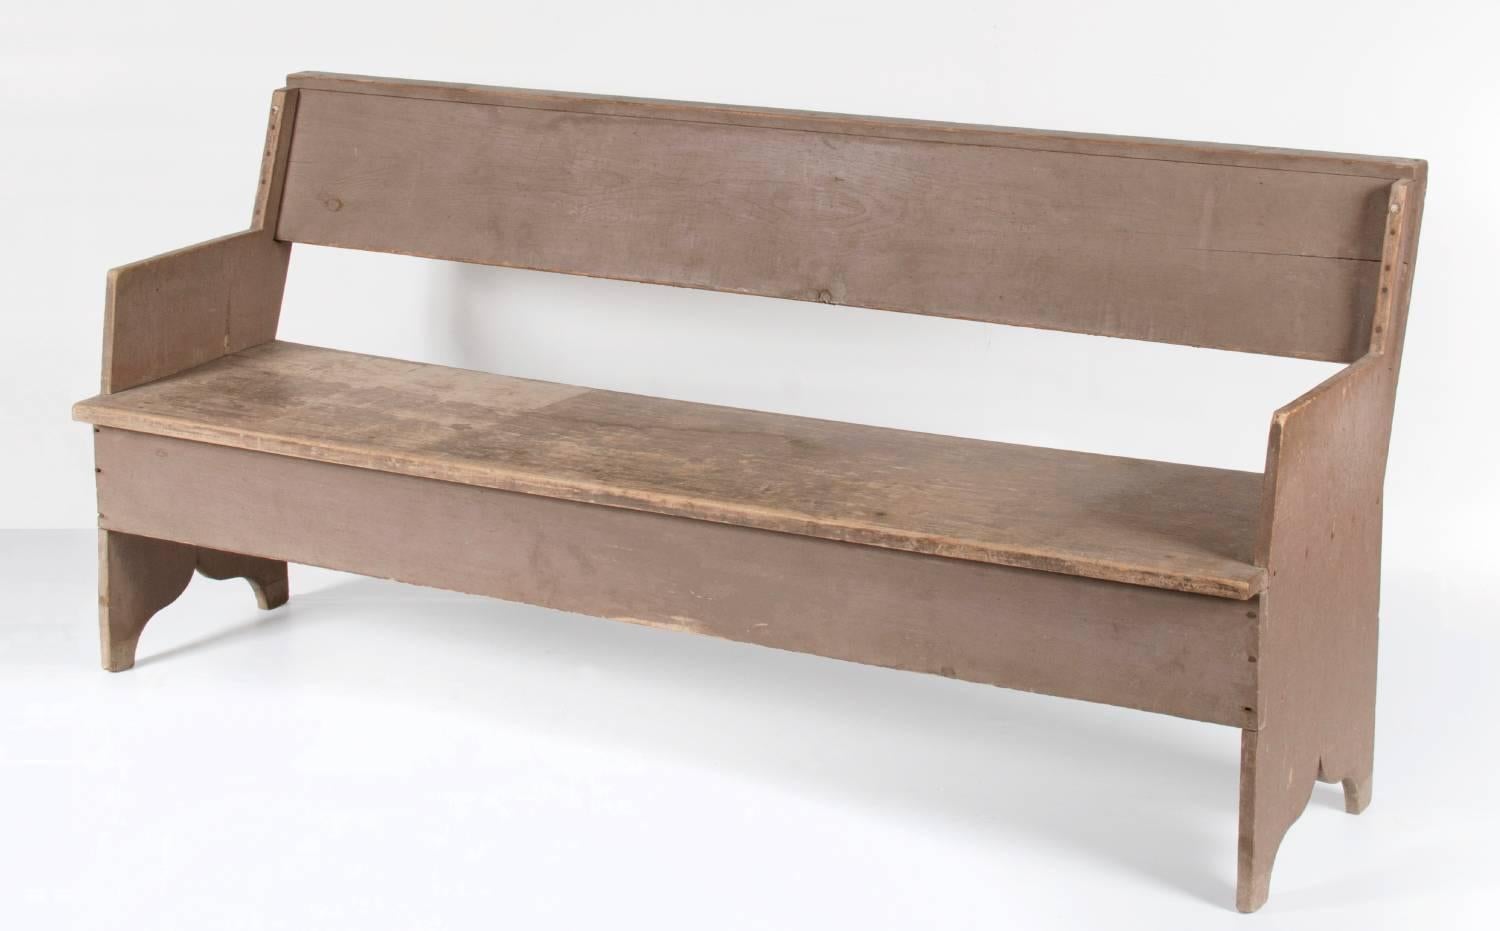 Unusual Plank-Seated Deacon's Bench with Plank Sides and a Canted Back 1